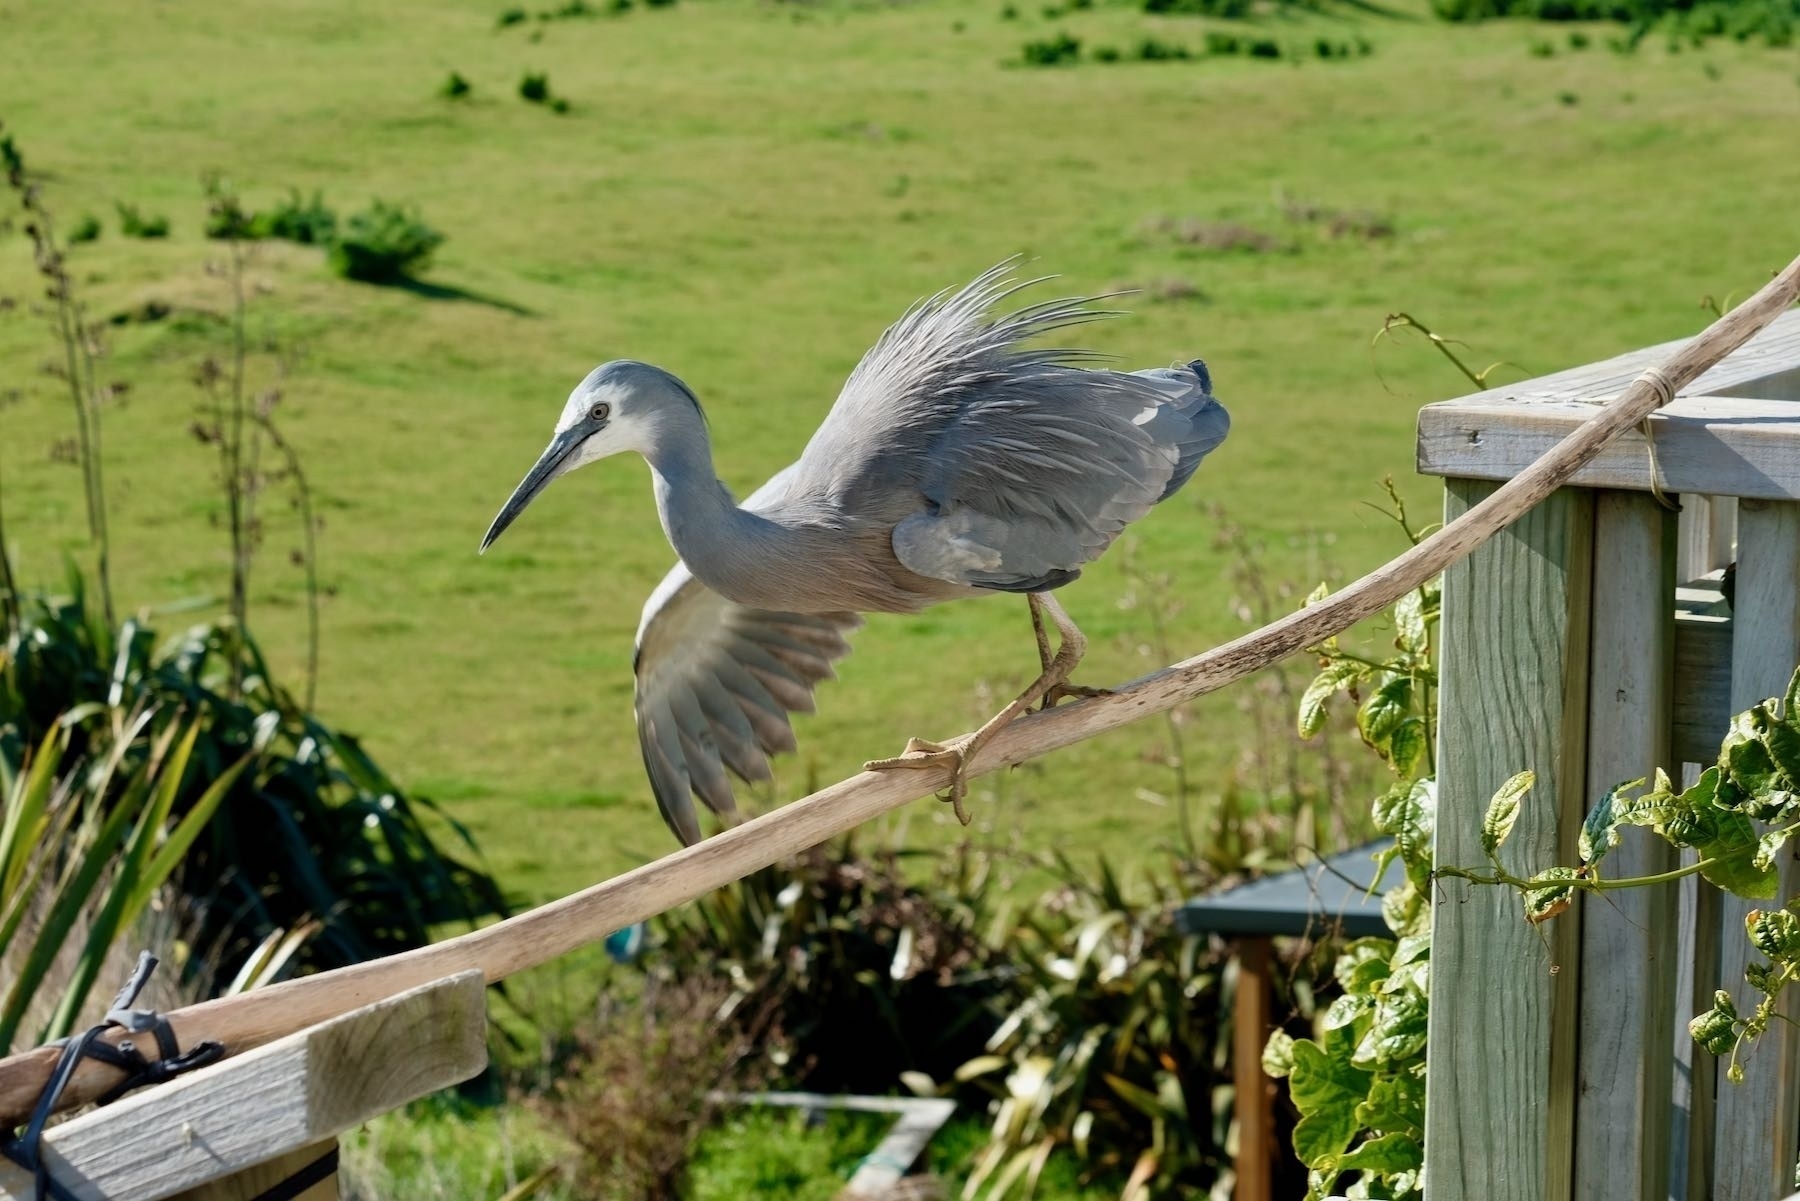 White-faced heron on a horizontal pole, using one wing to balance. 